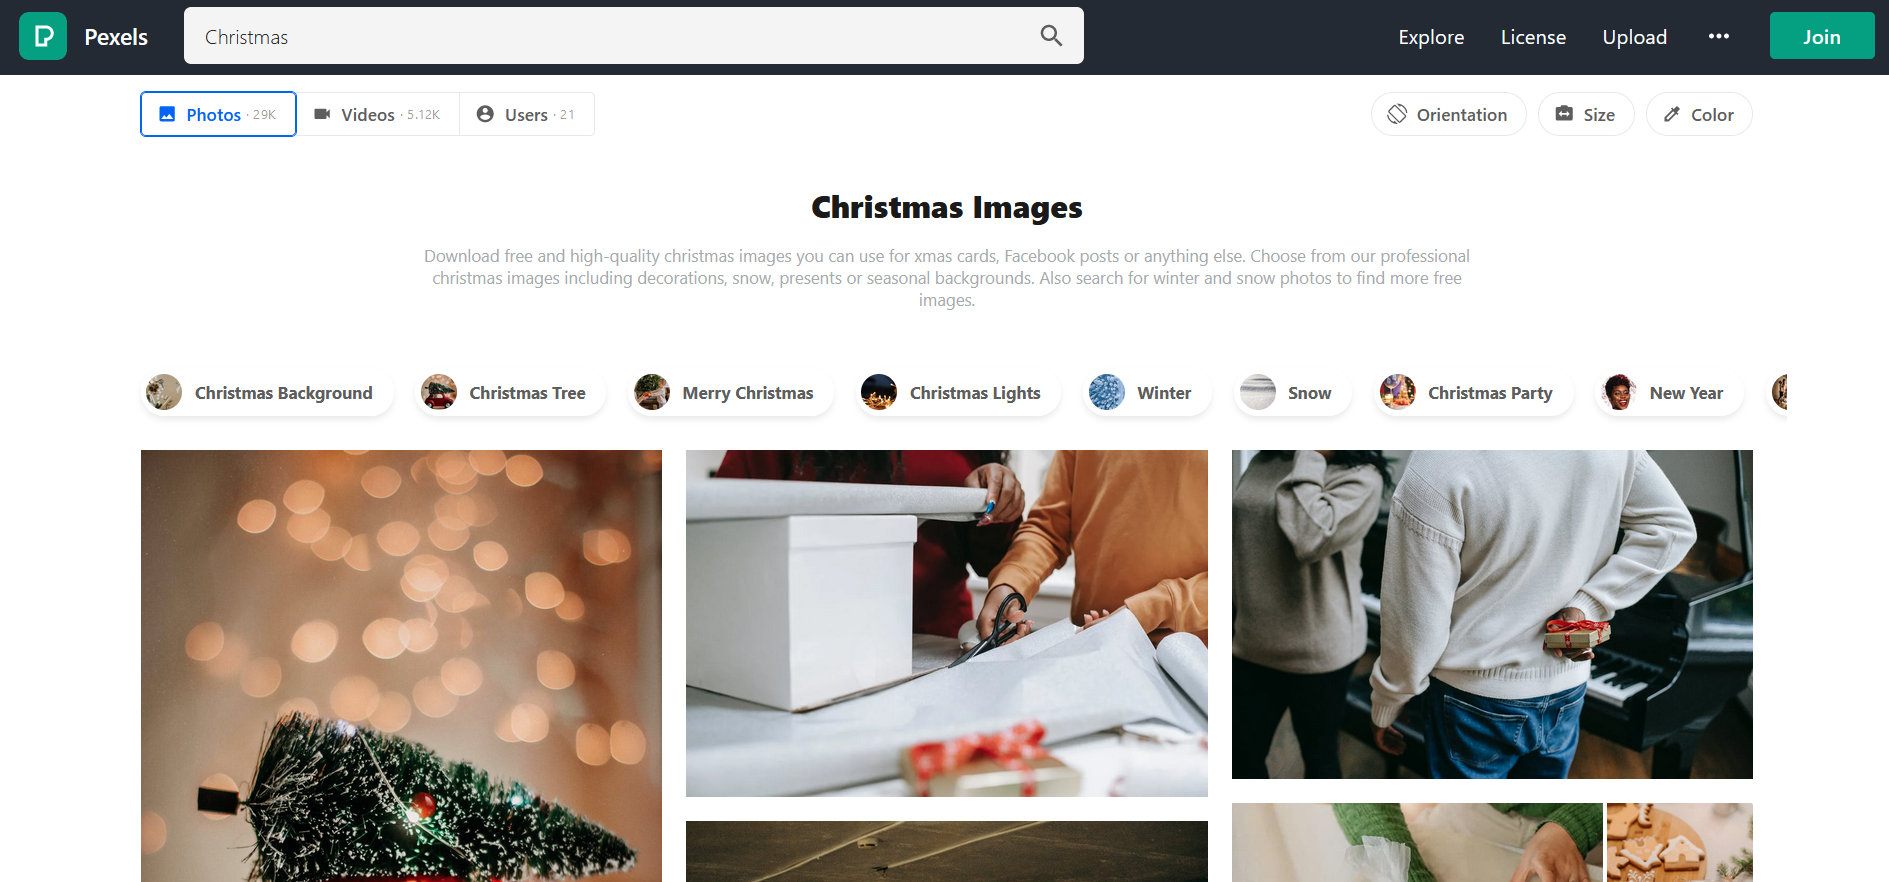 Screenshot of the search results for “Christmas” on the stock photo website Pexels